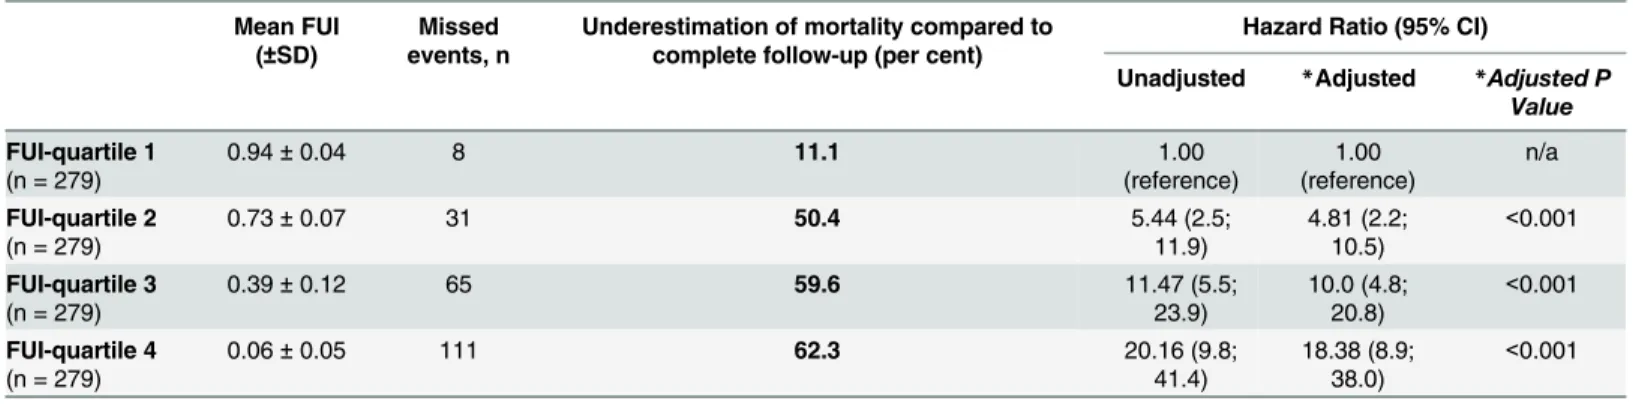 Table 2. Association between FUI and underestimation of mortality in potential survivors (n = 1116).